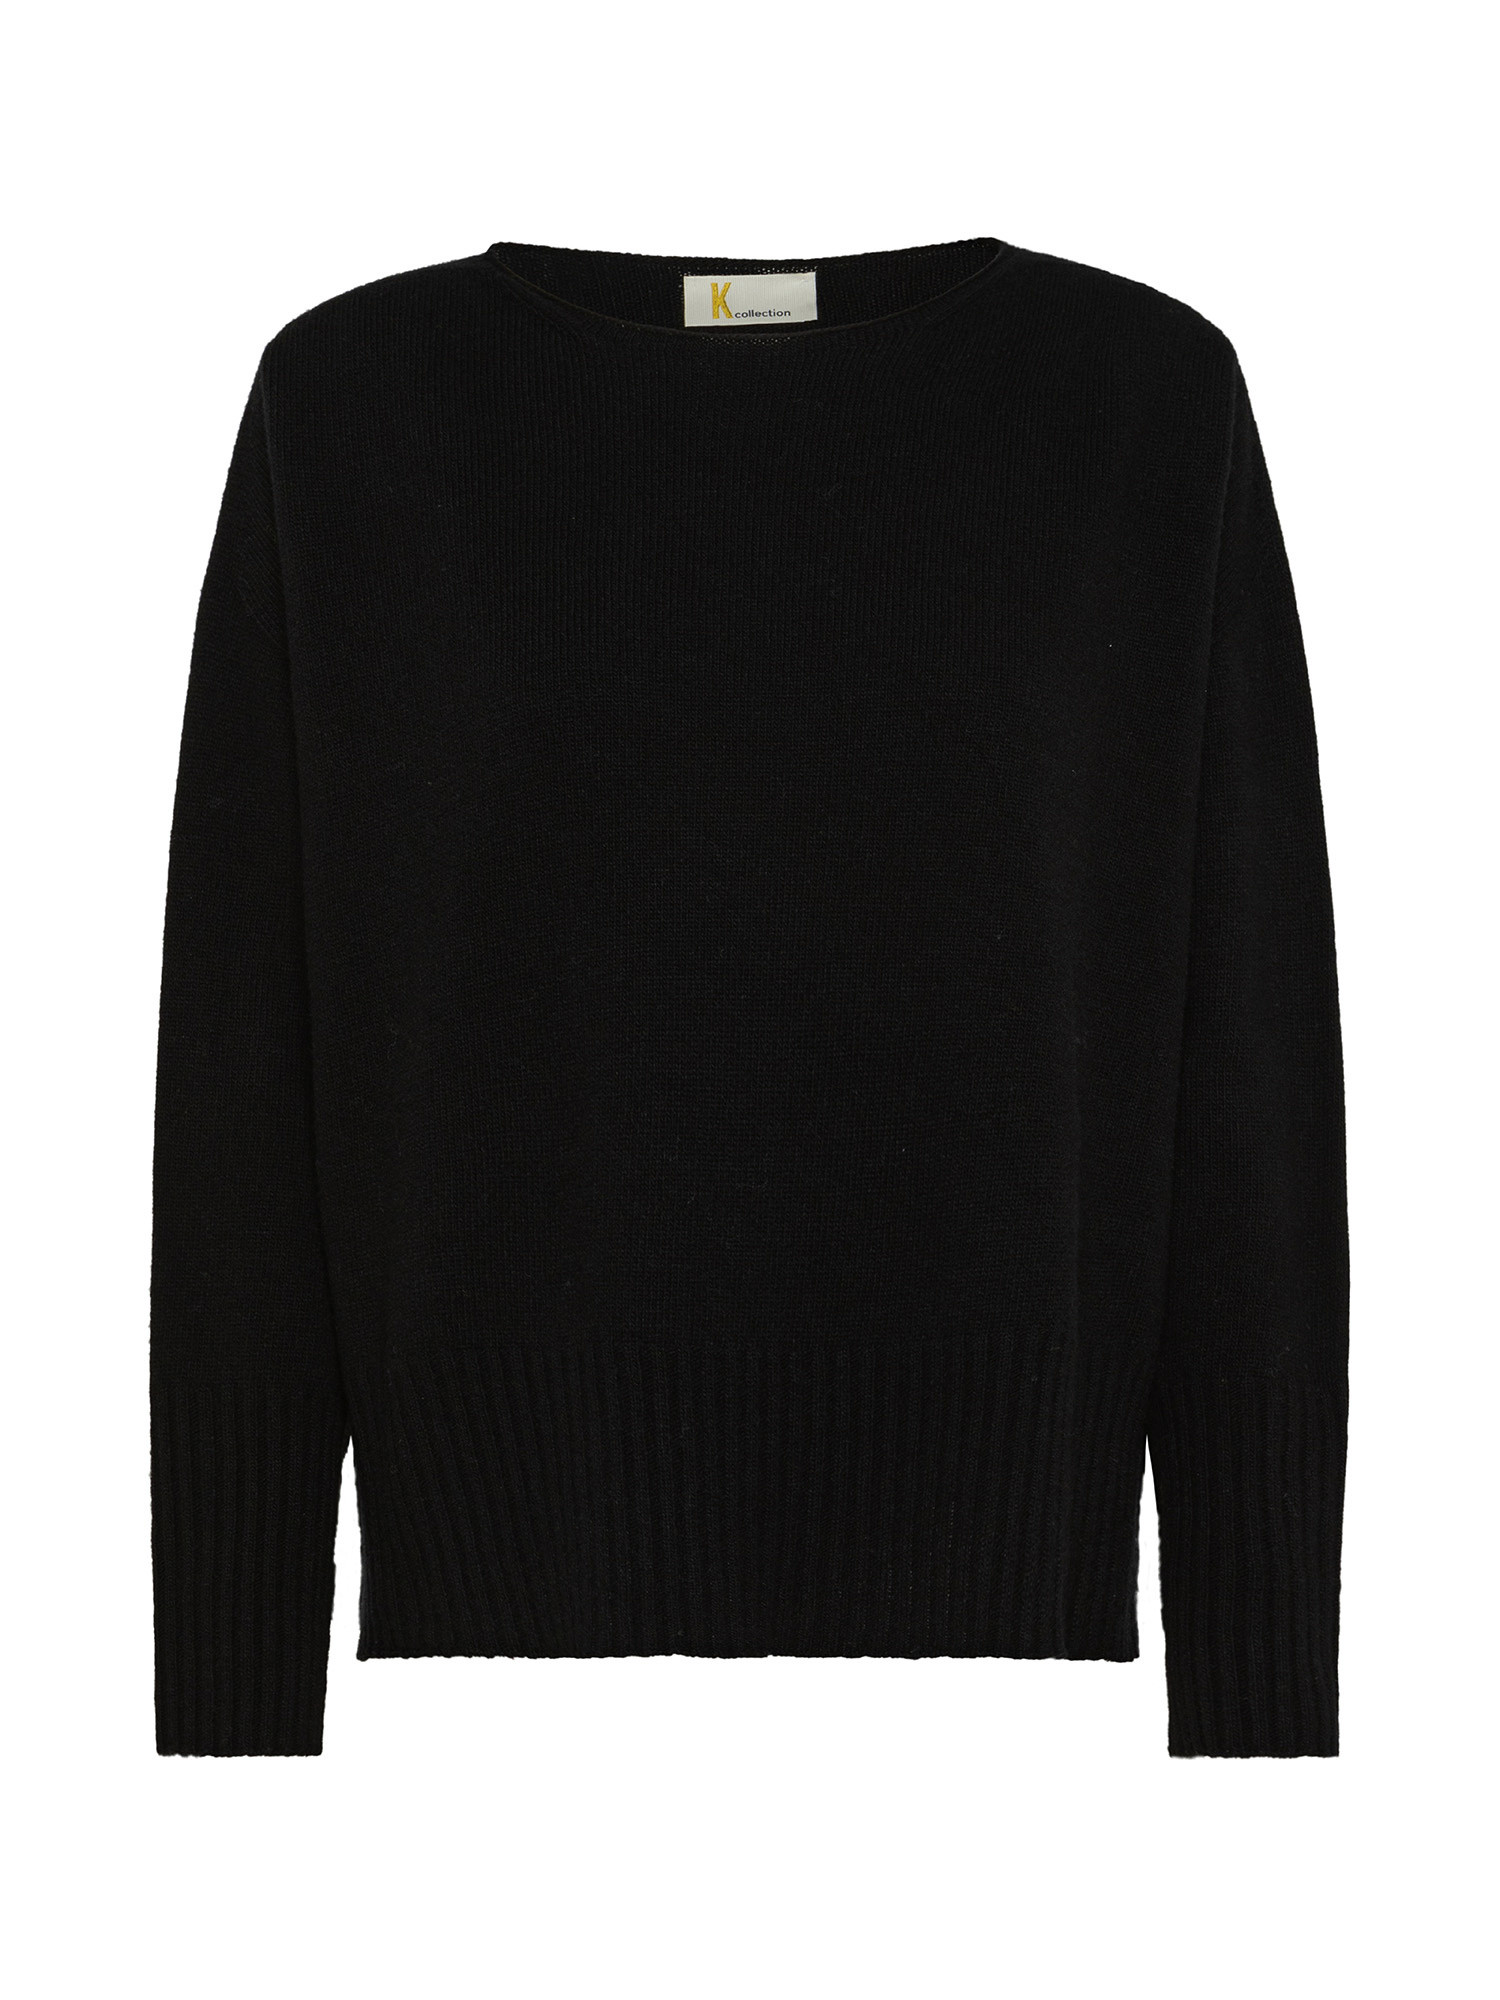 K Collection - Carded wool pullover, Black, large image number 0